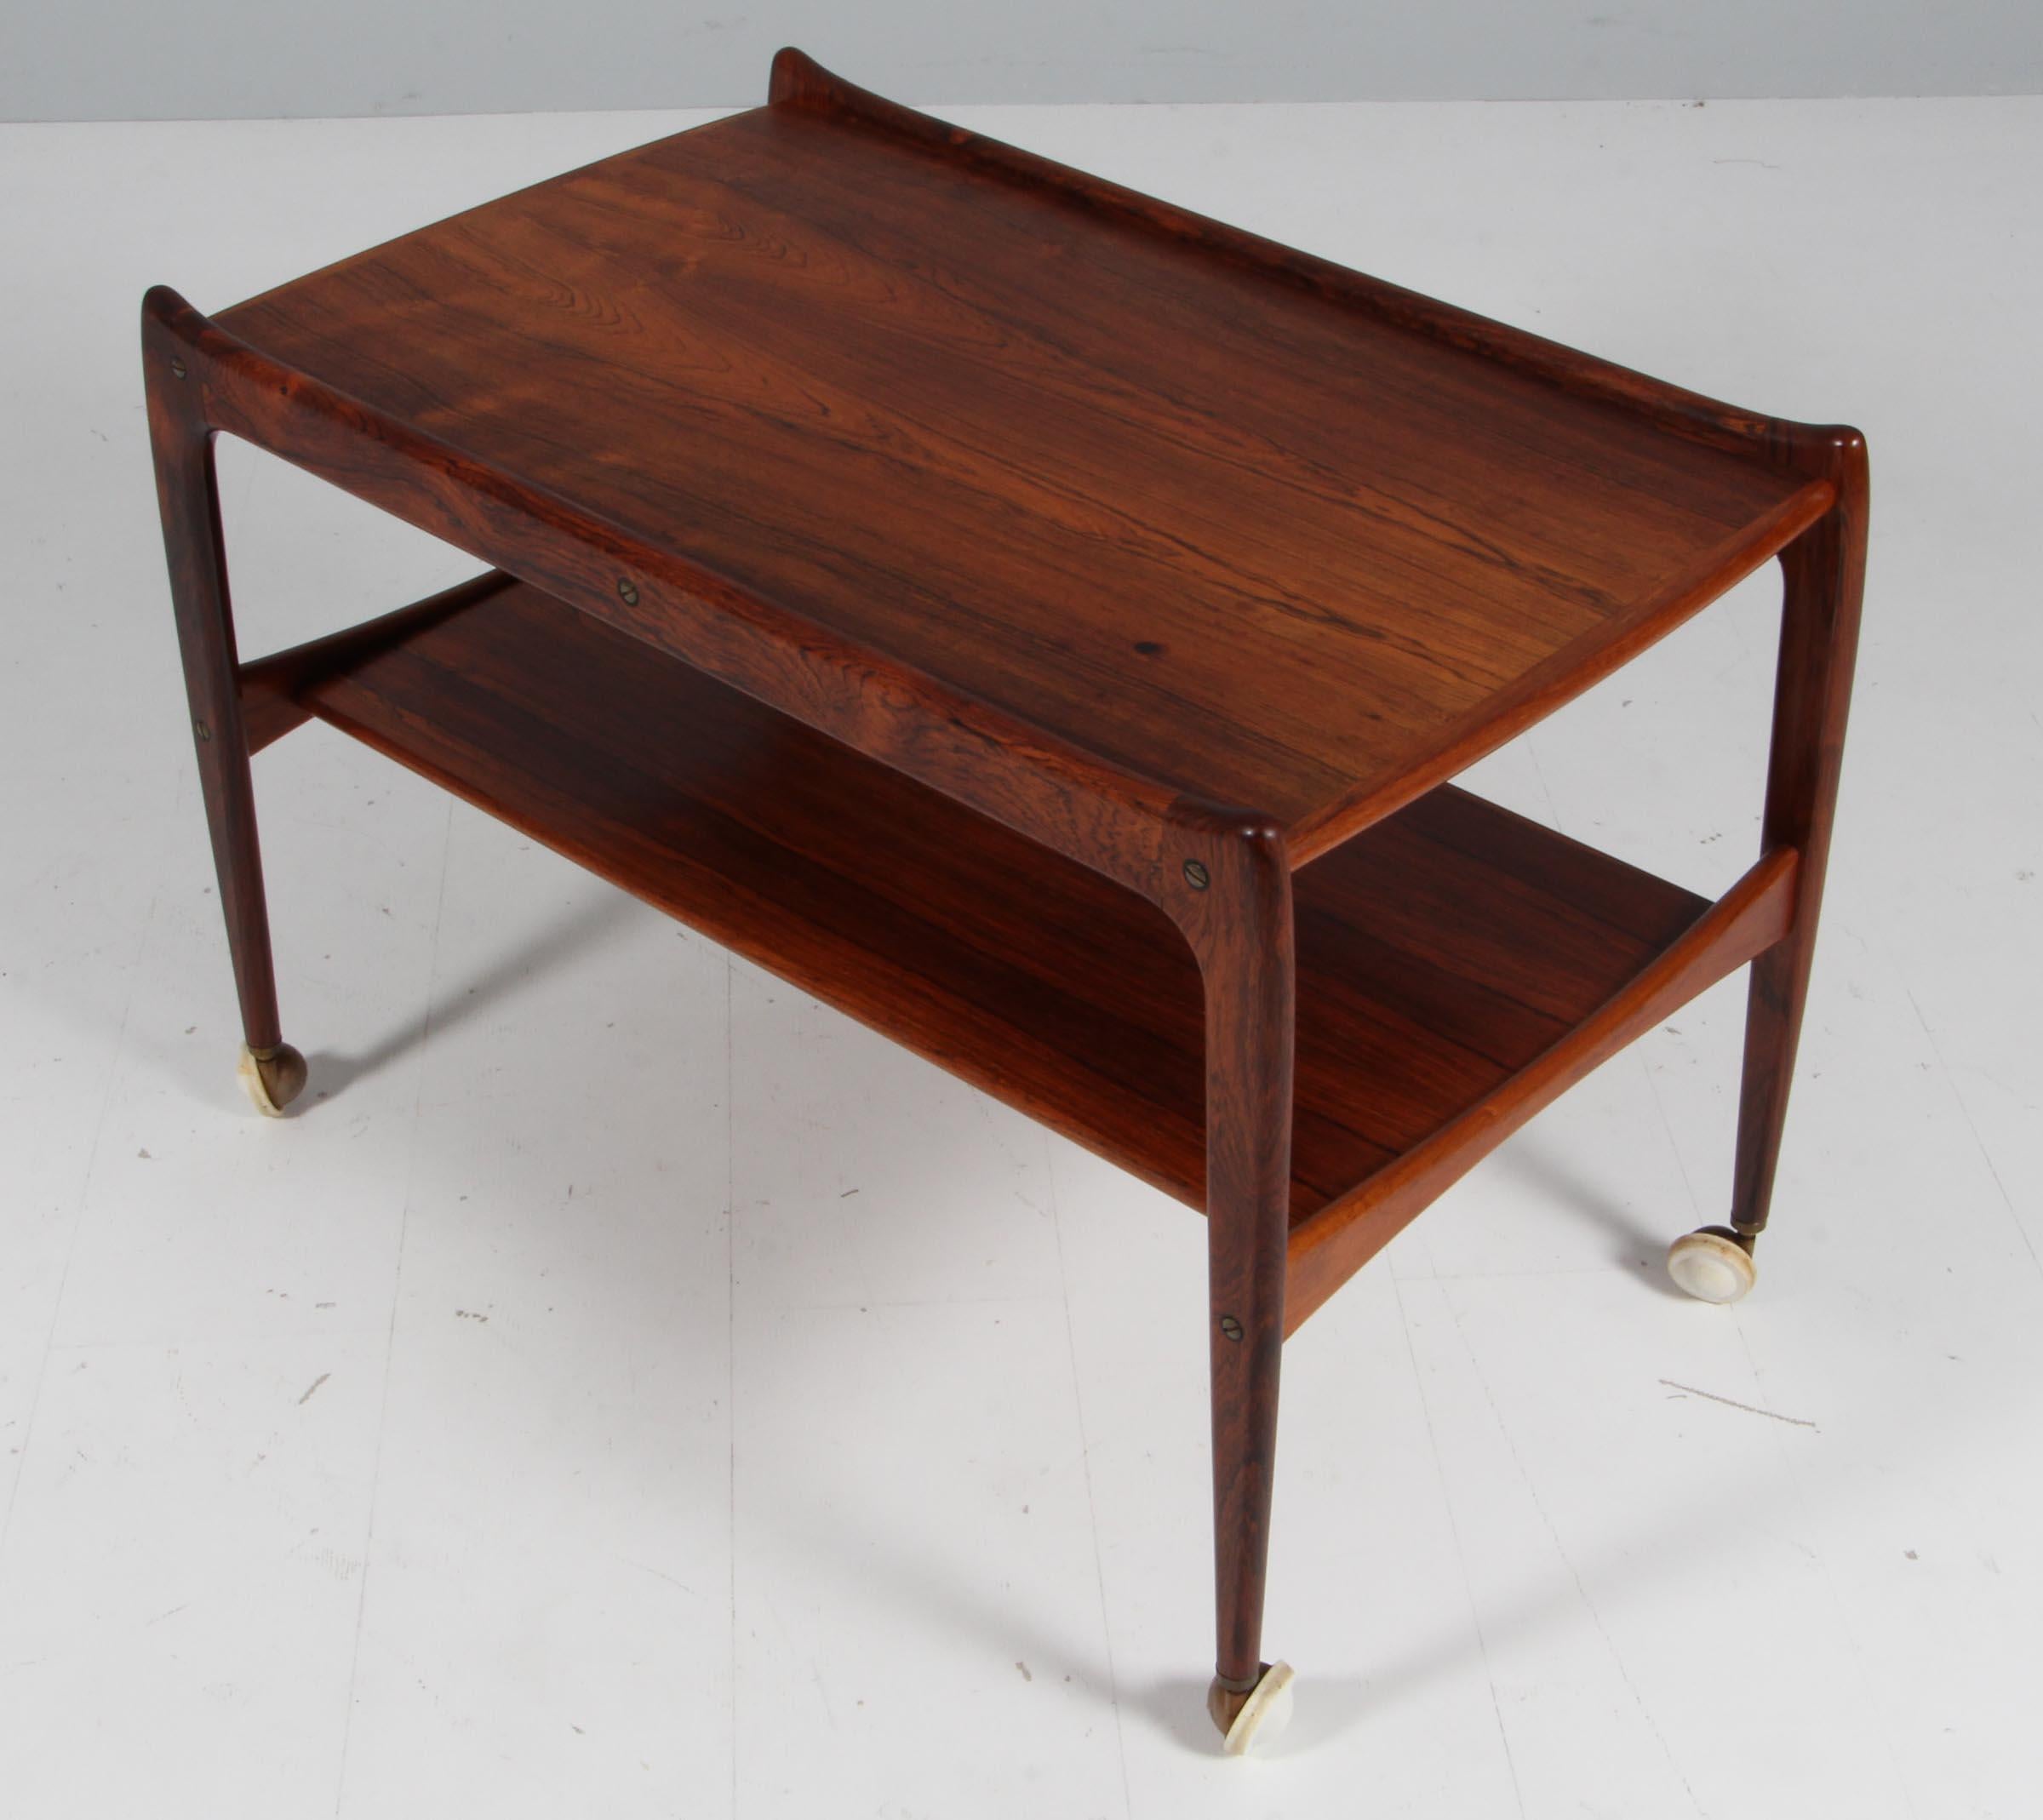 Danish cabinetmaker, bar cart in rosewood.

Mounted on wheels.

Made in the 1960s.